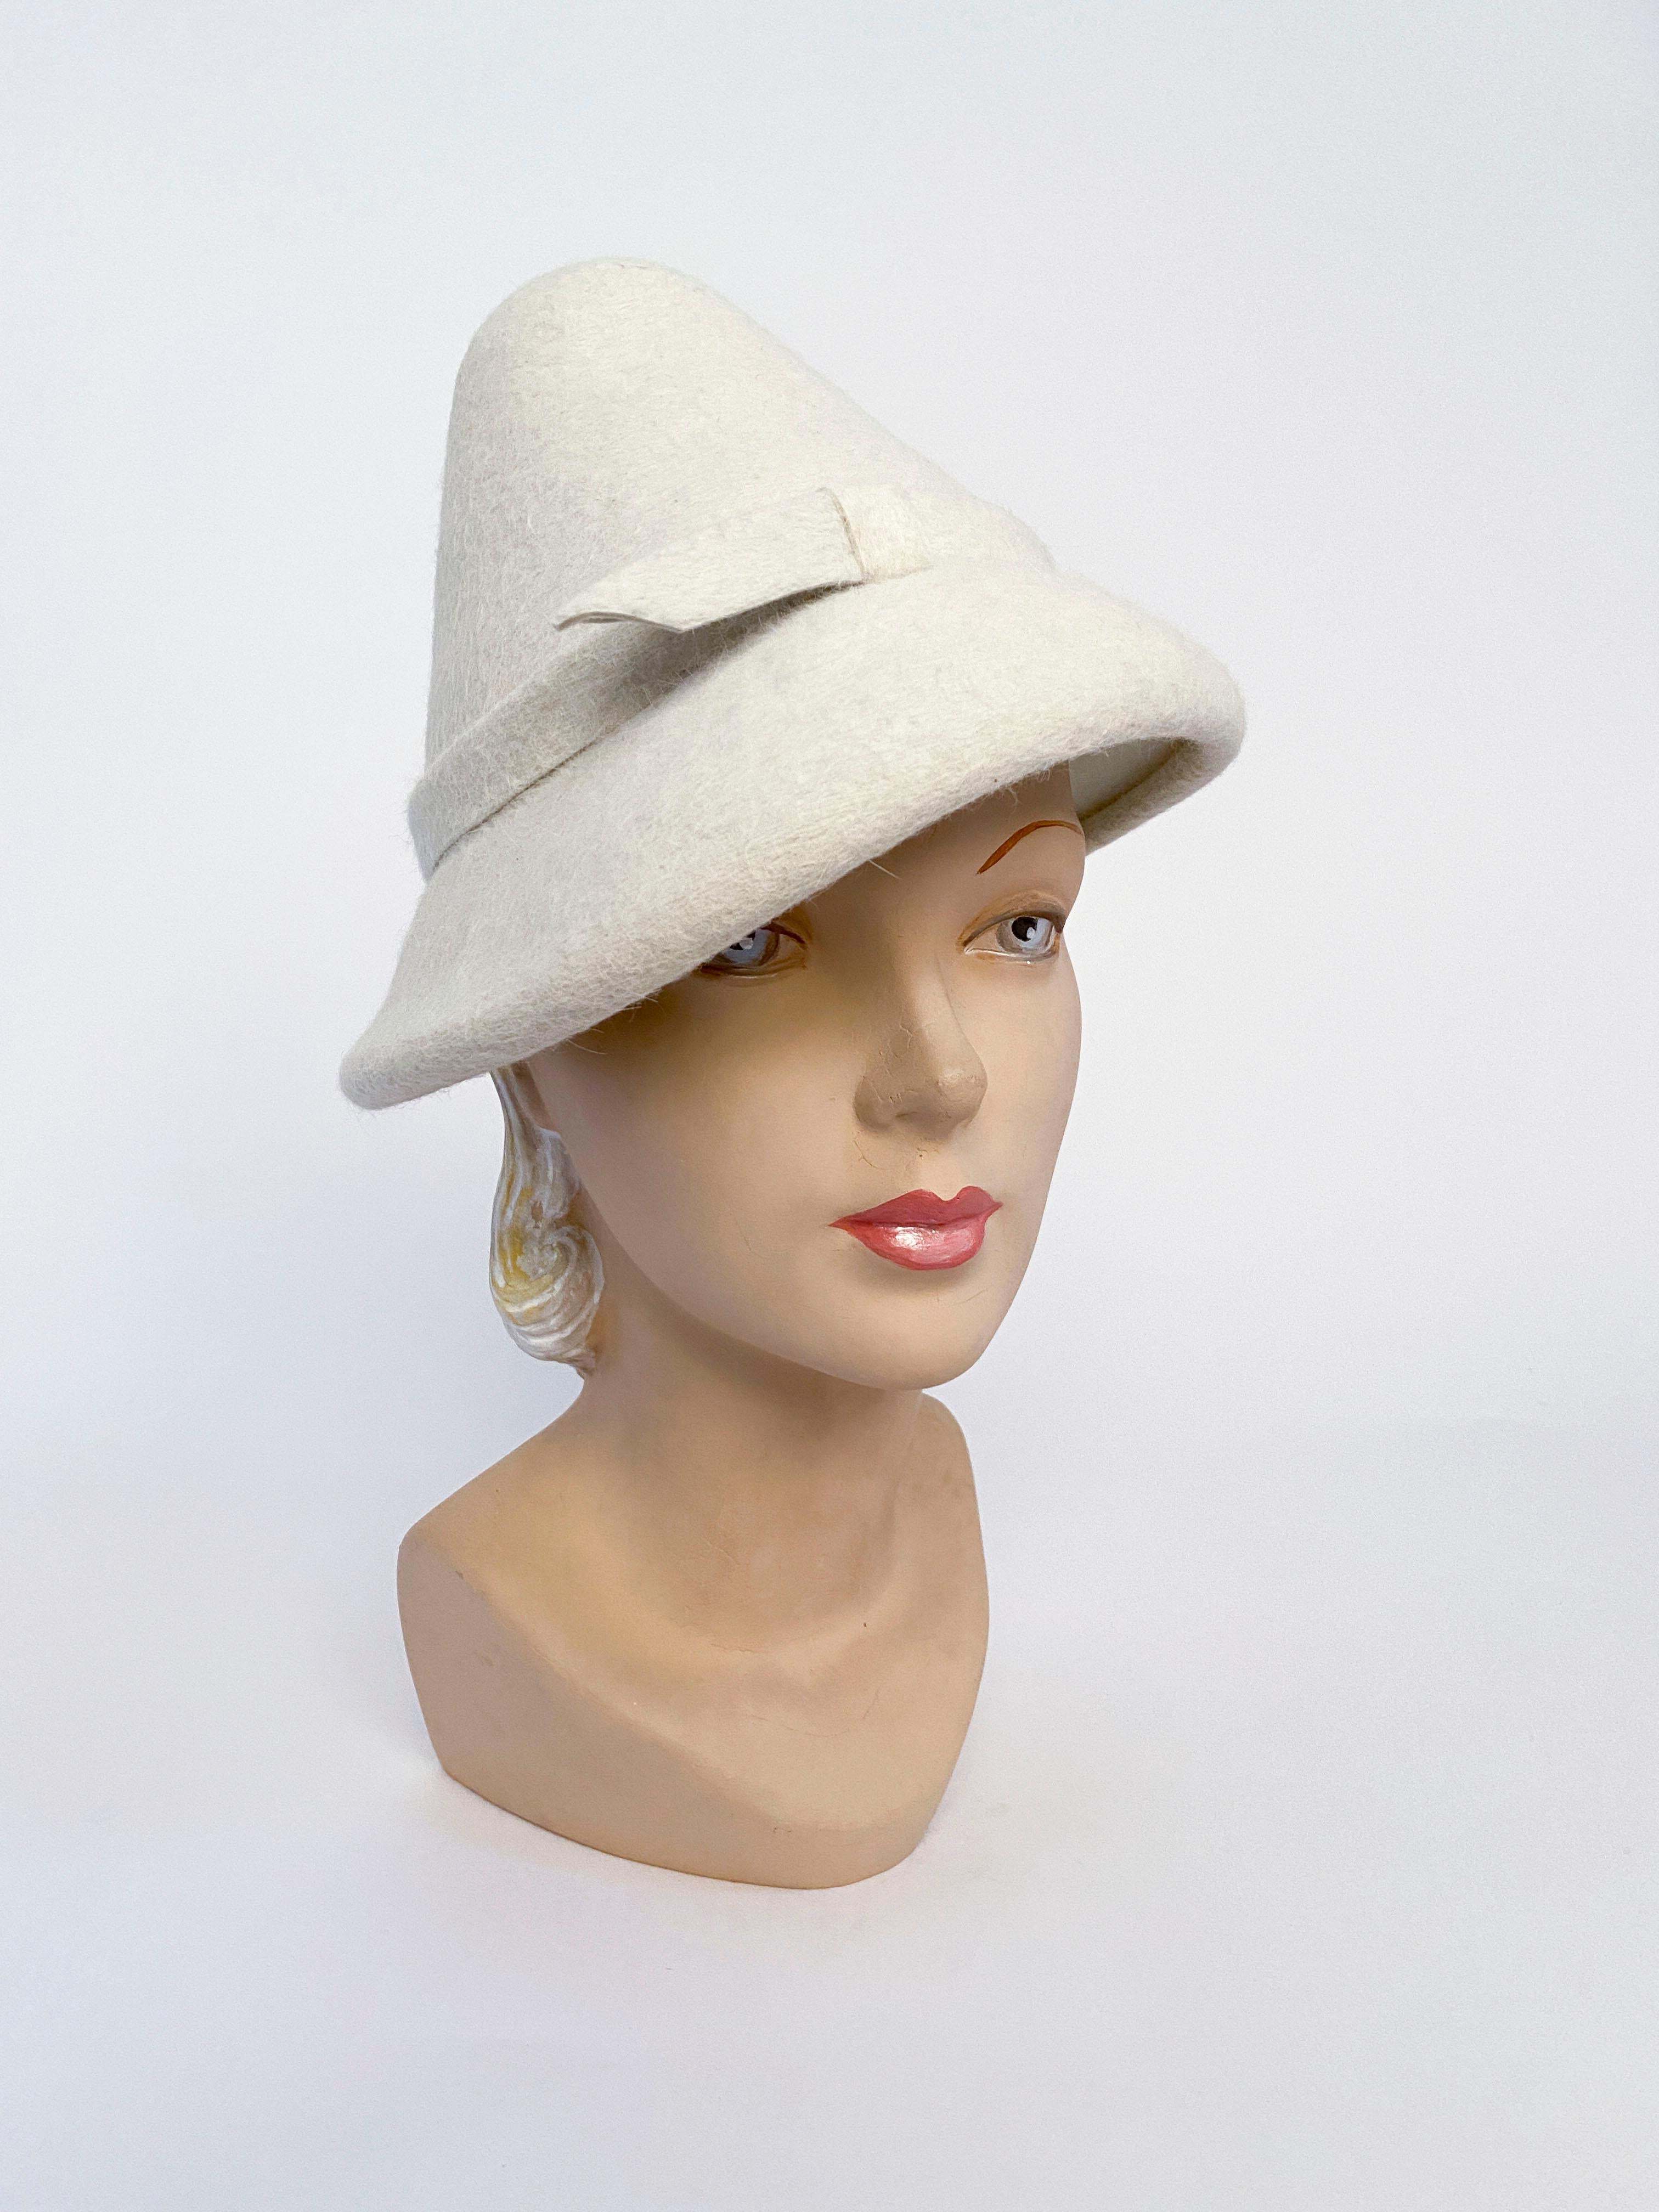 1960's cream fur felt hat hand sculpted into a high triangular crown finished with a thin hatband and decorative loop. Considering the age this hat was part of high fashion during the 1960s seen in fashion magazines.